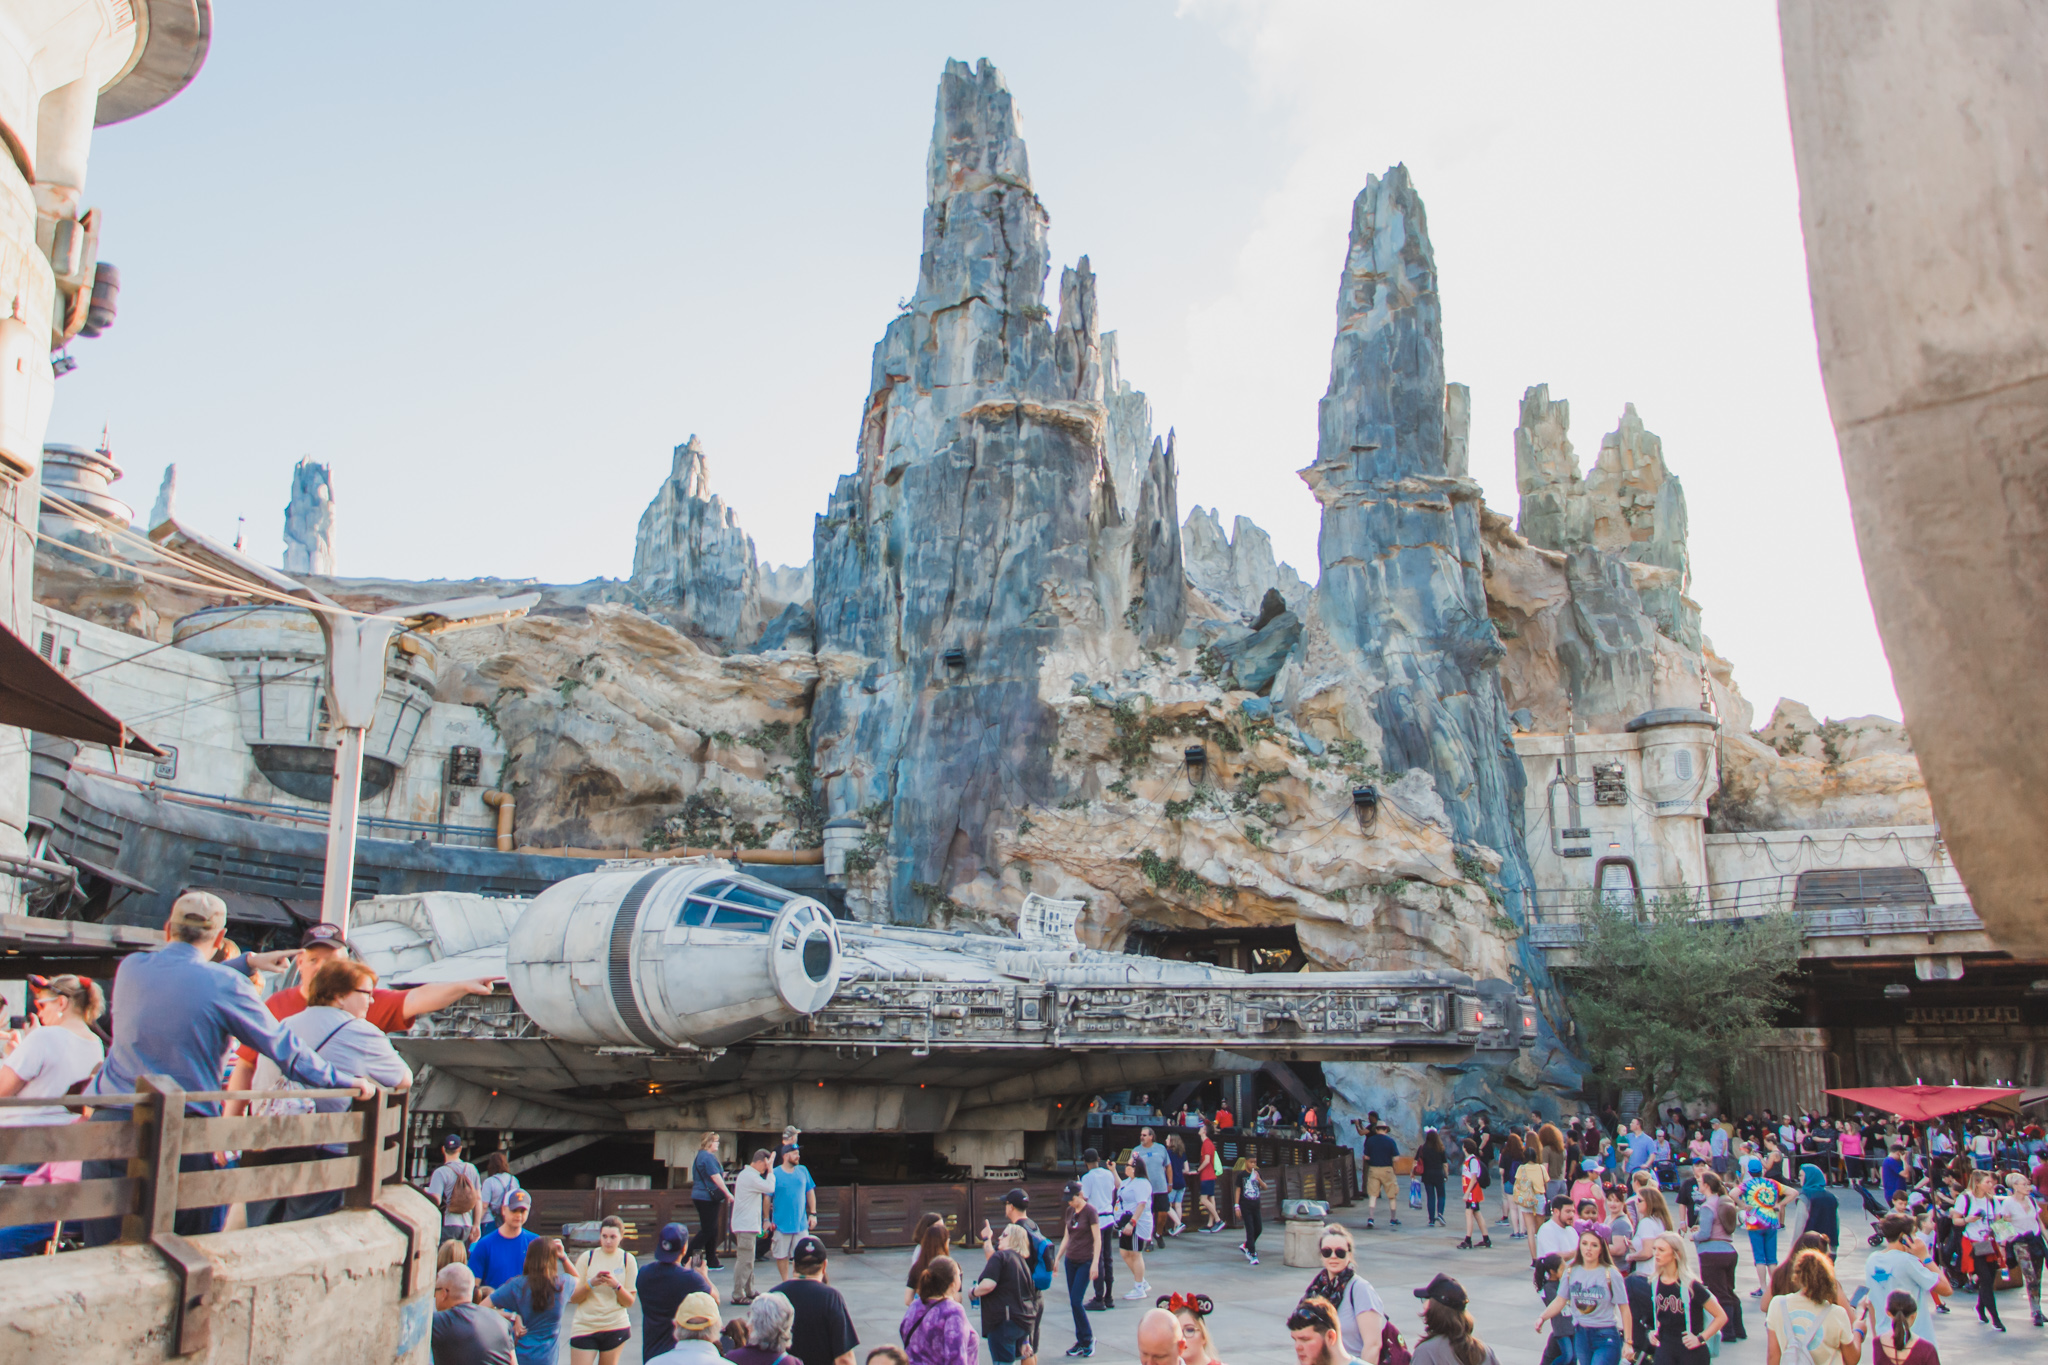 Millenium Falcon with crowds and spires at Star Wars galaxy's edge Disney World Hollywood Studios Orlando Florida